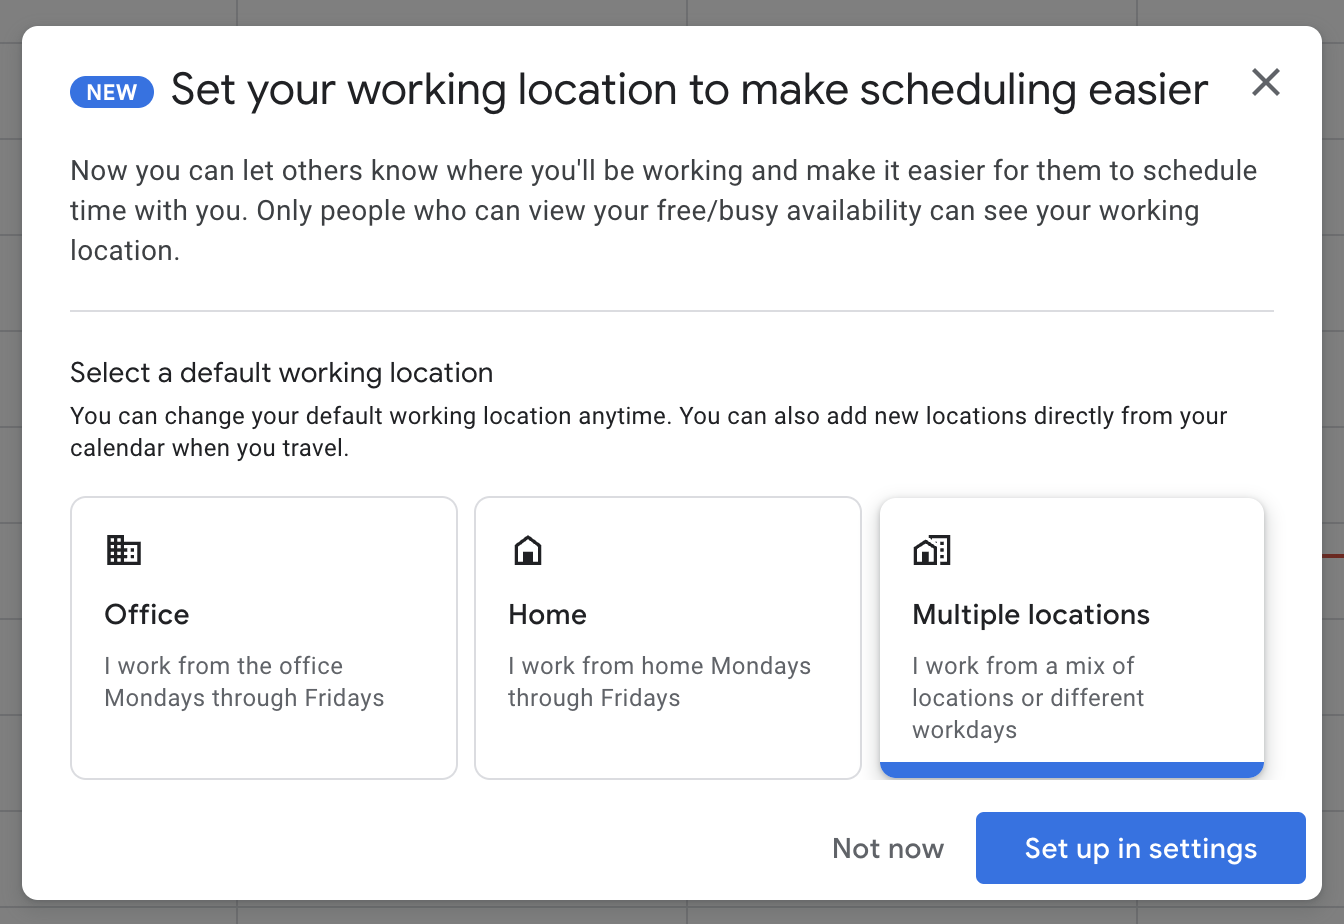 New set your working location onboarding dialog box in Google Calendar